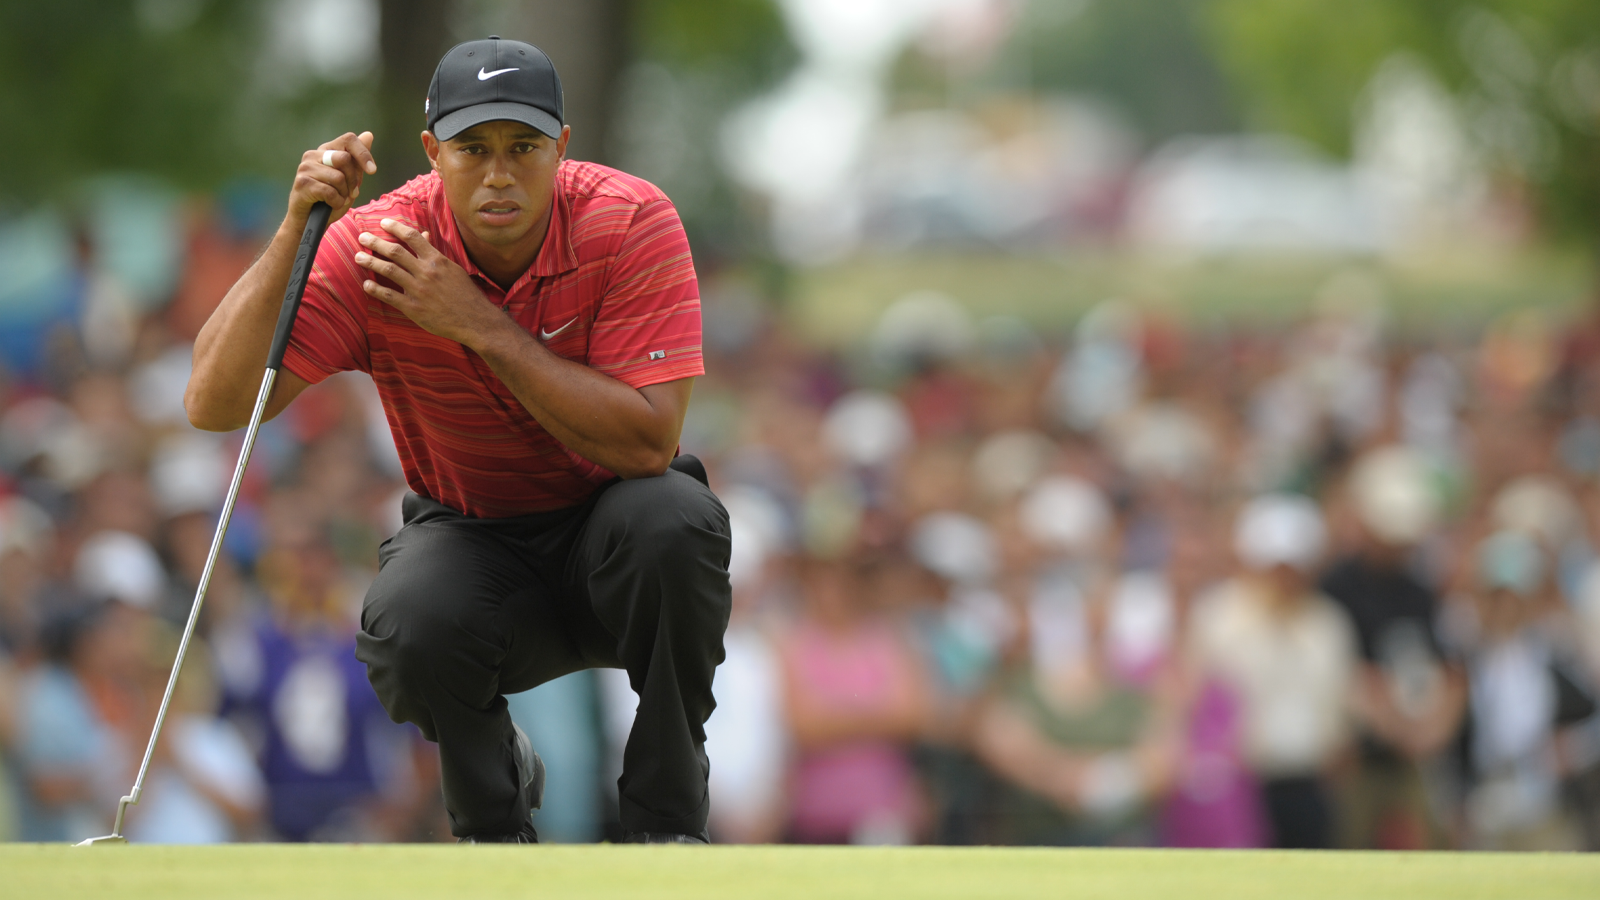 Tiger Woods reads his putt at the 91st PGA Championship at Hazeltine National Golf Club in 2009.